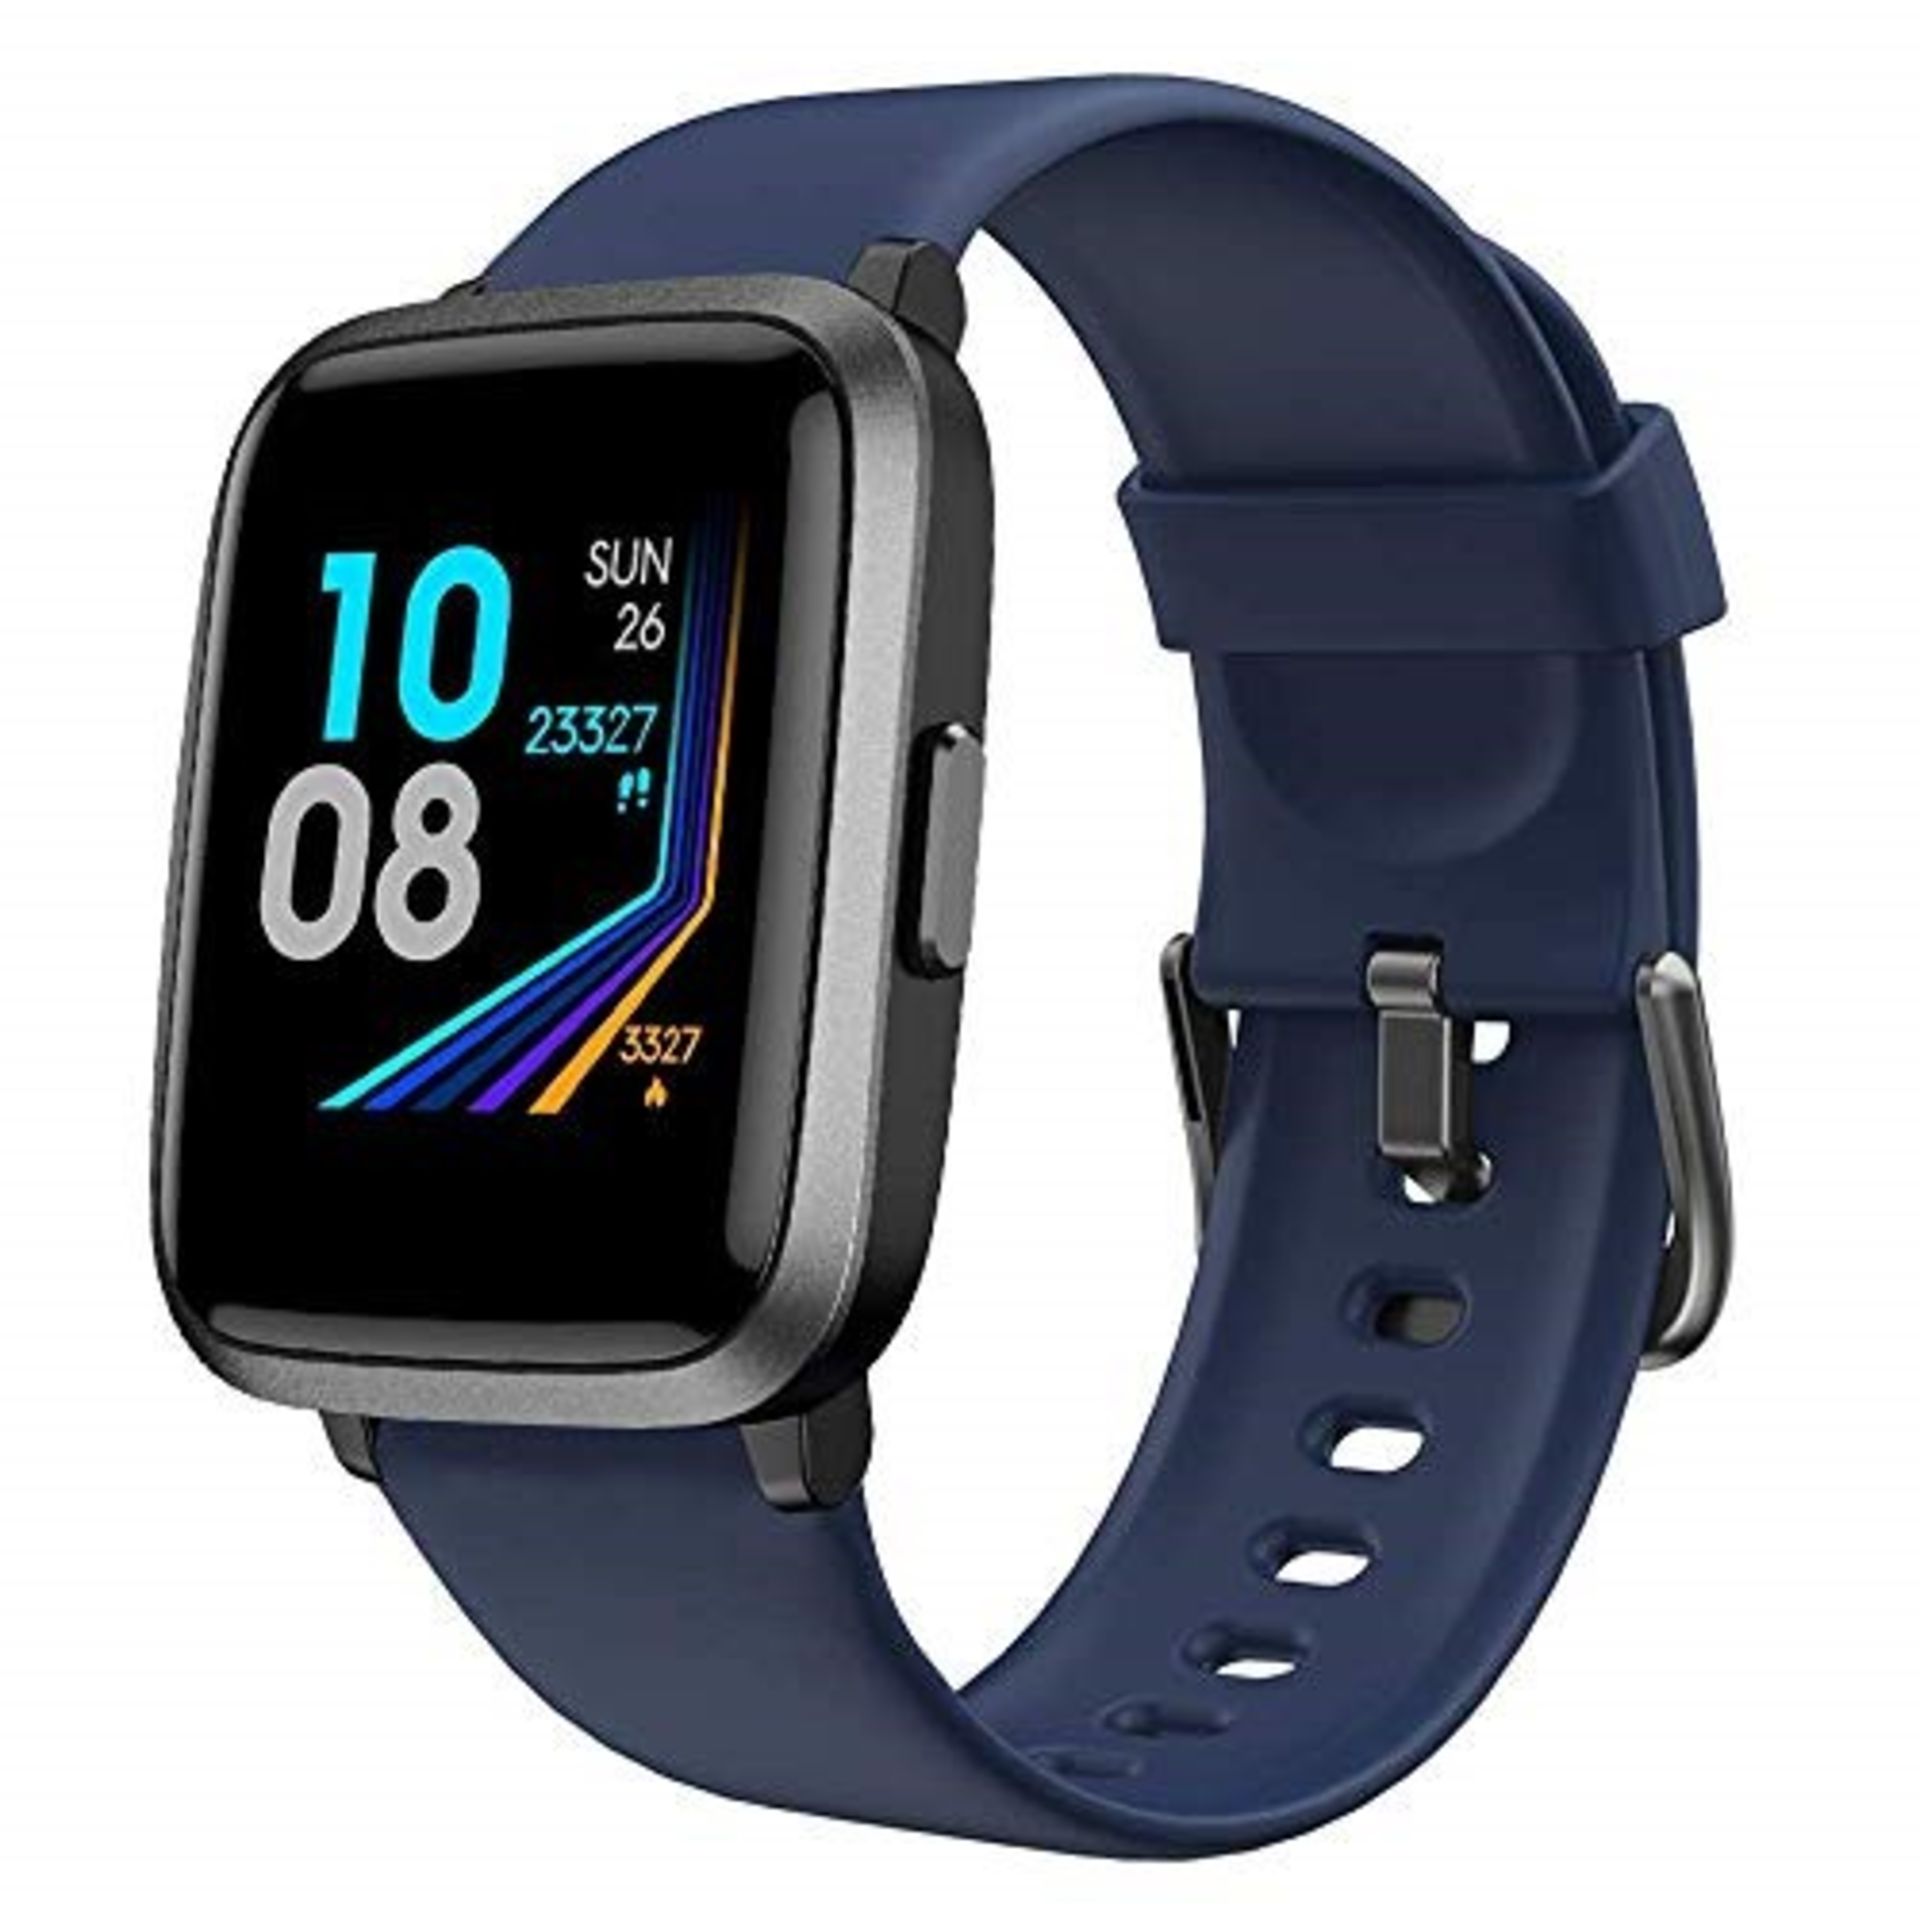 YAMAY Smart Watch,Fitness Trackers With Heart Rate Monitor/Pulse Oximeter/Blood Oxygen